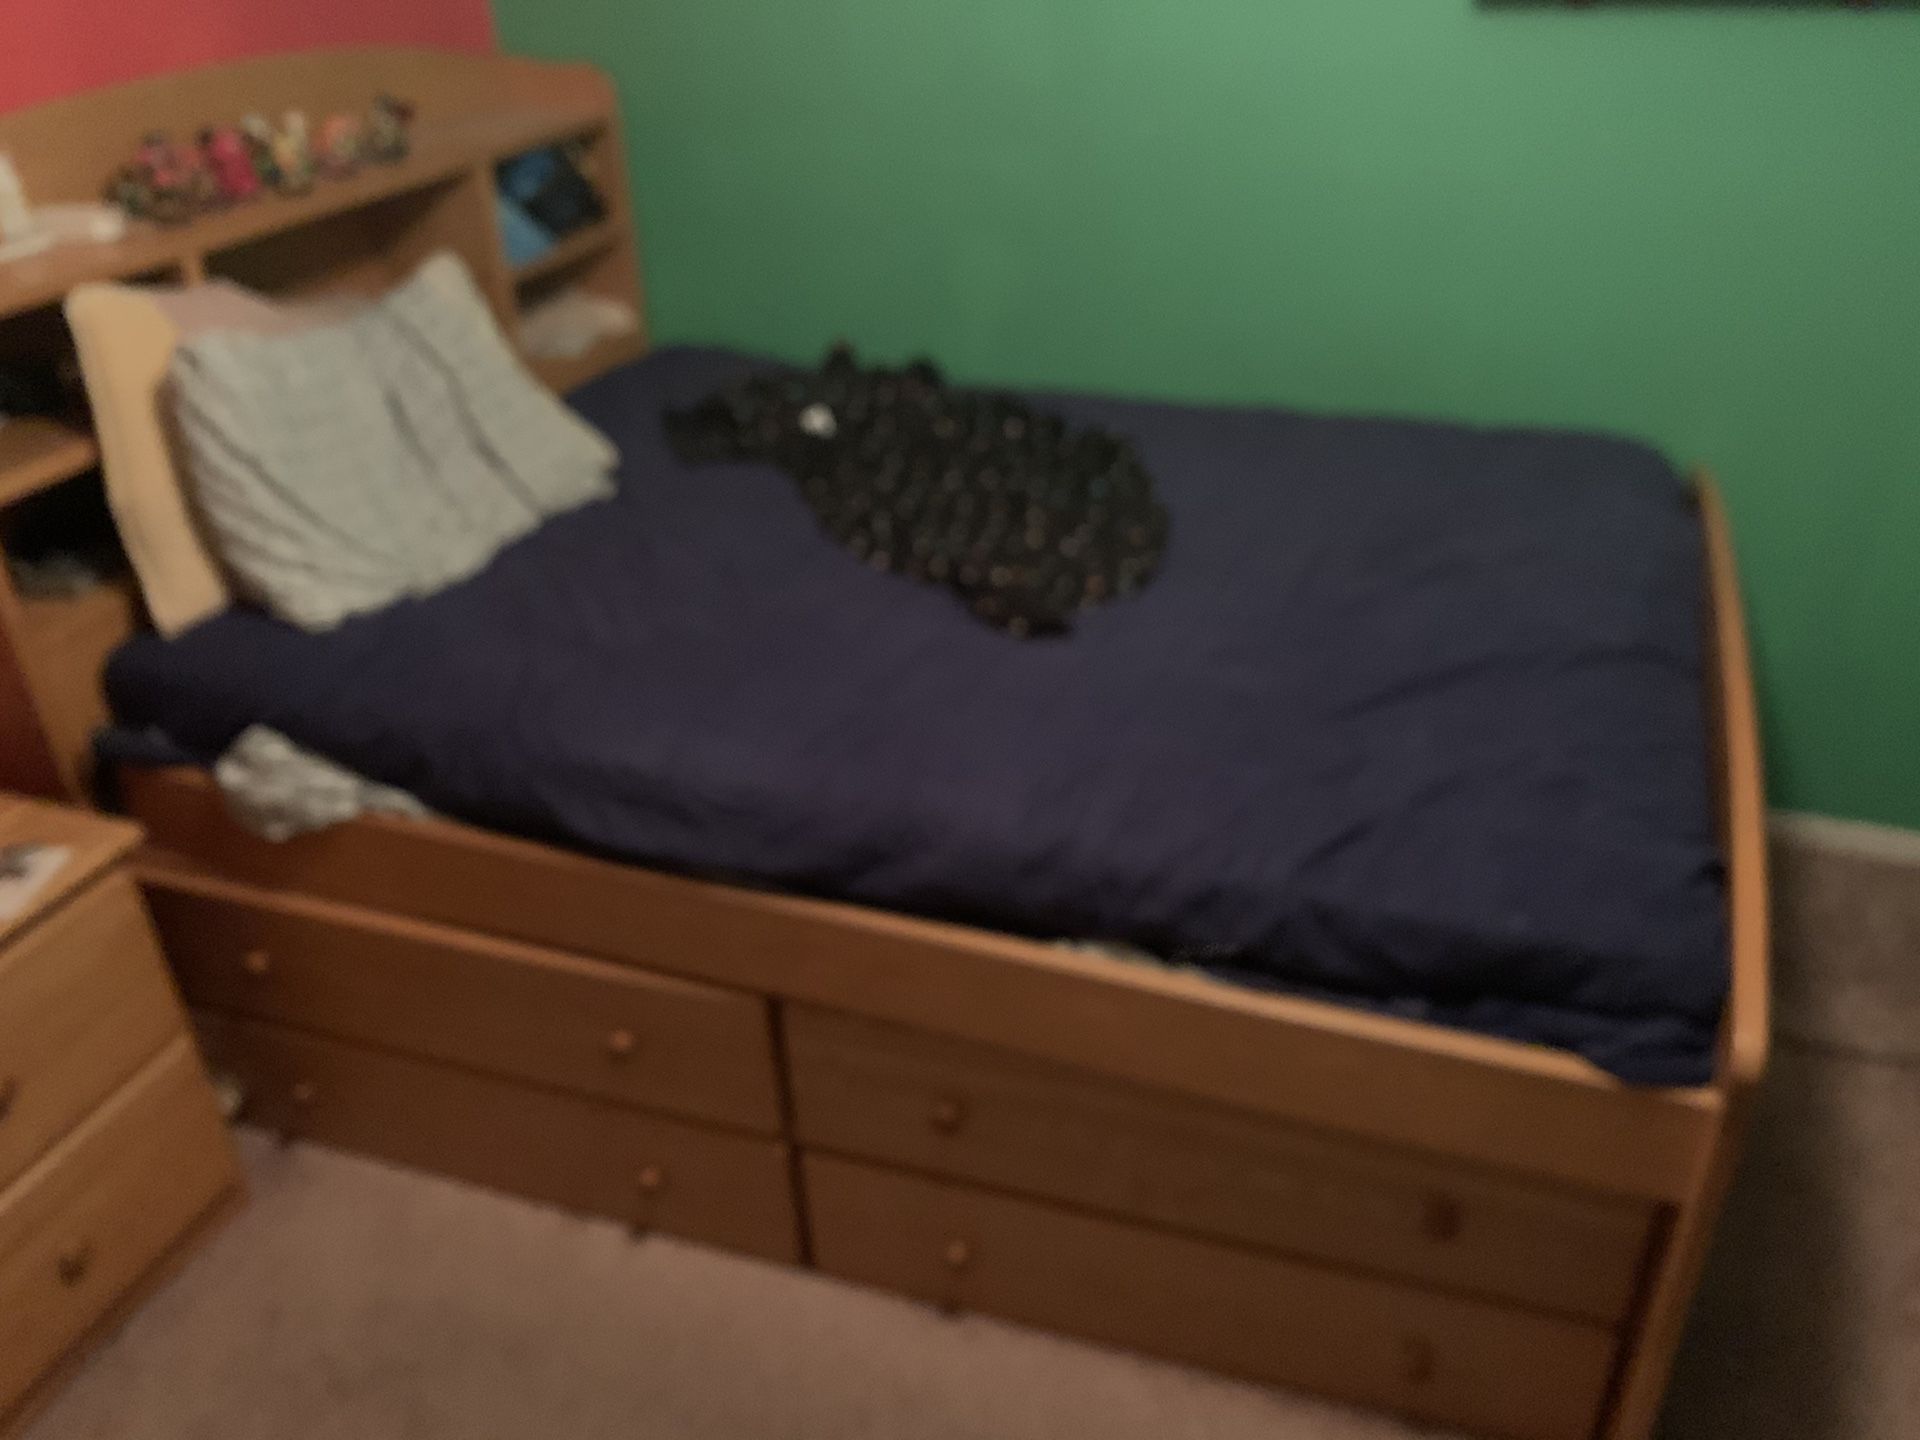 Queen size bed for sale, with drawers in frame, door in front for storage under bed. Mattress and box included.